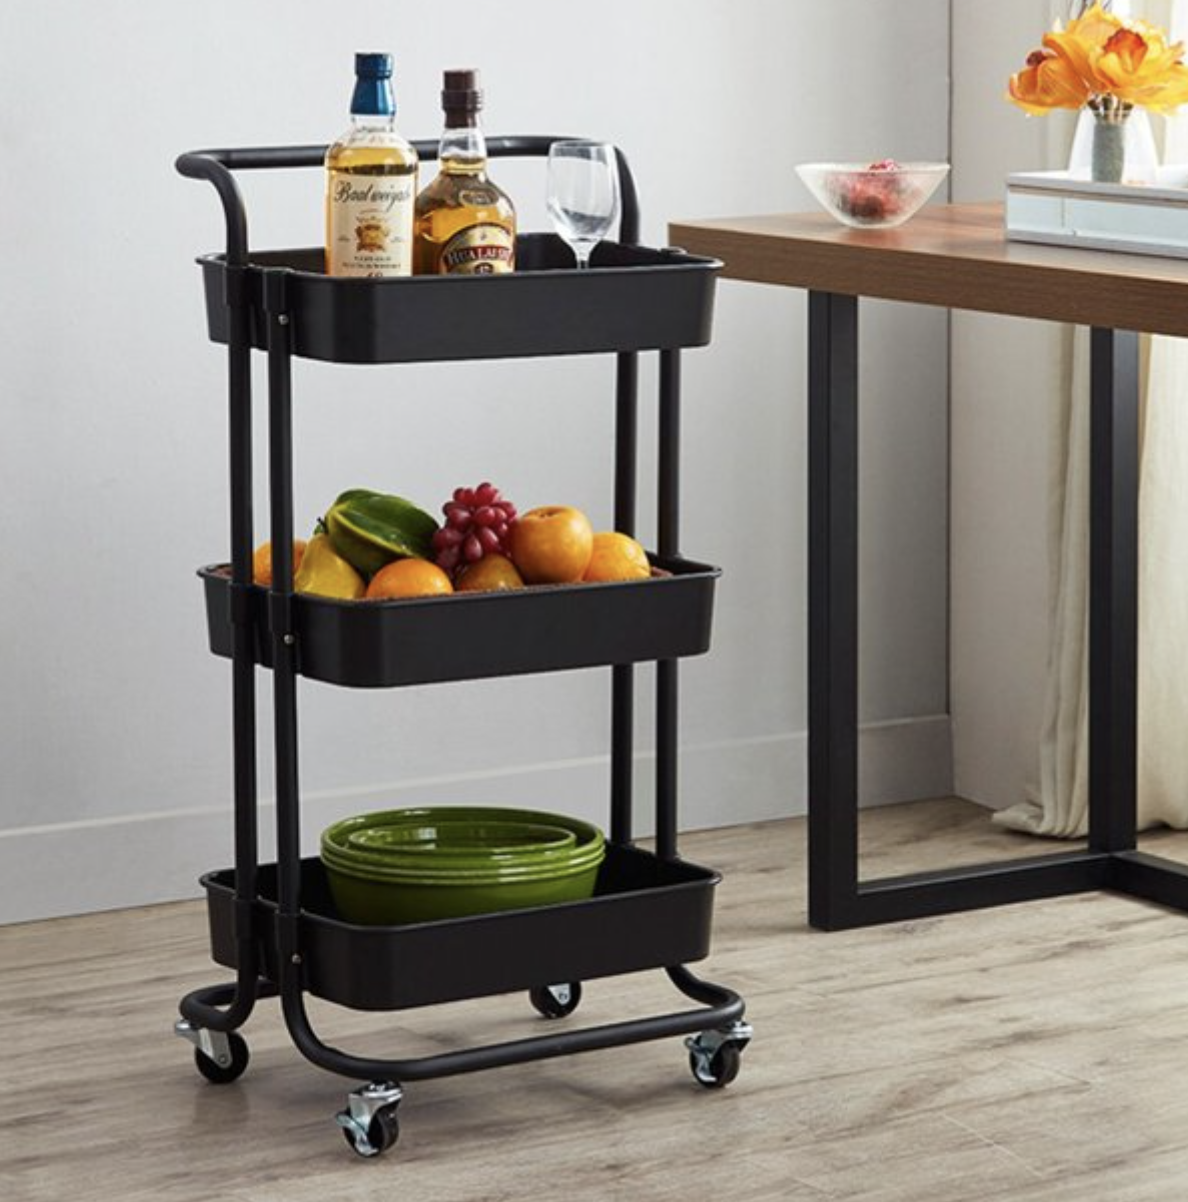 black three-tier rolling cart with shelves filled with alcohol bottles, fruit, and green plates